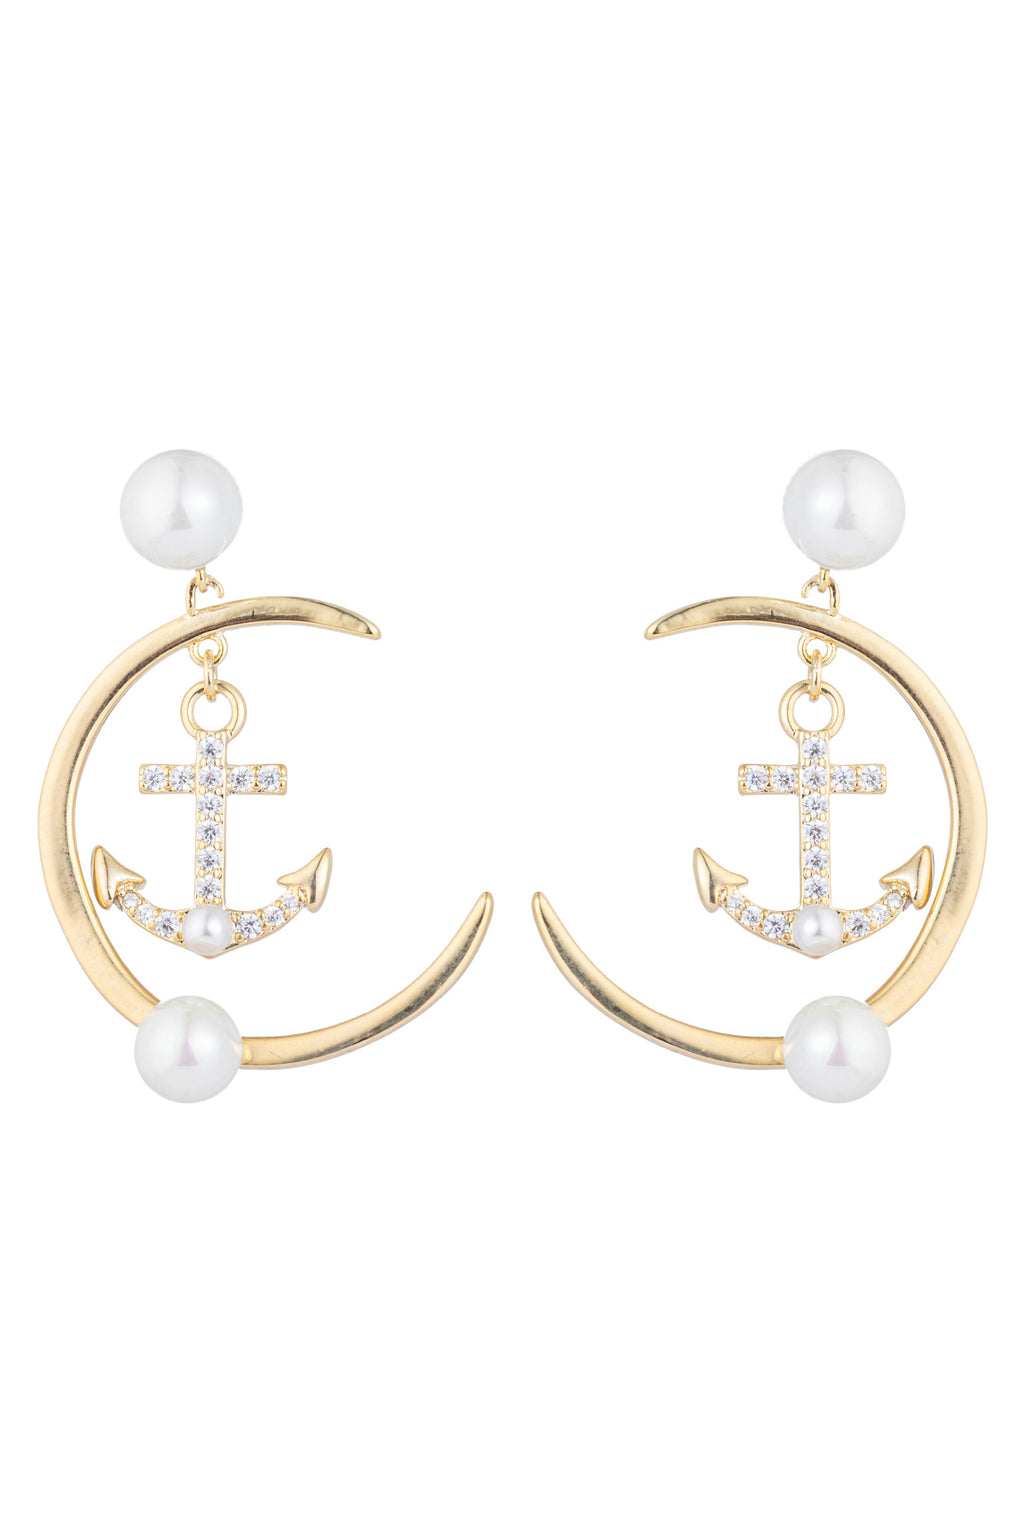 Anchor loop earrings studded with CZ crystals.